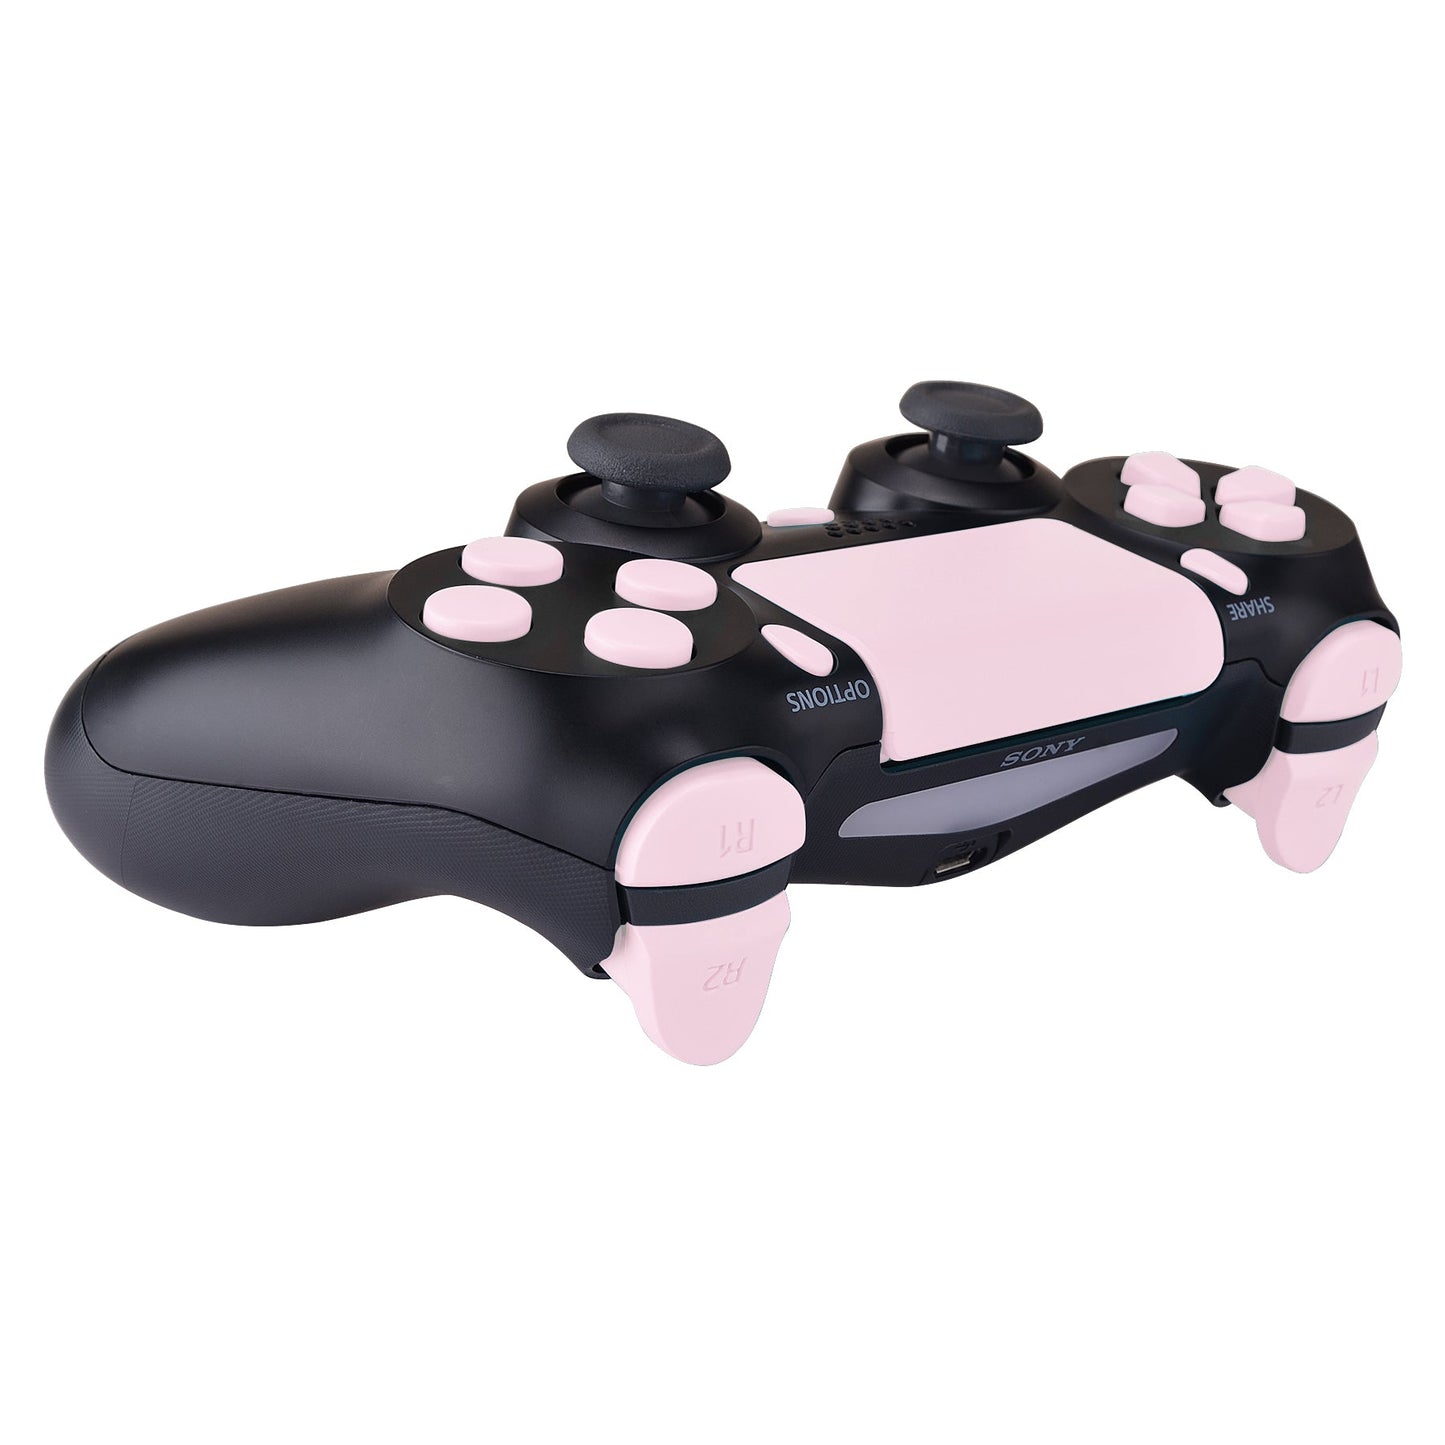 eXtremeRate Replacement D-pad R1 Options – Repair Cherry Triggers eXtremeRate Full ps4 Pro for Pink Blossoms L1 R2 Controller Share Home Kit Action Slim L2 Buttons Set Buttons Controller, for Touchpad ps4